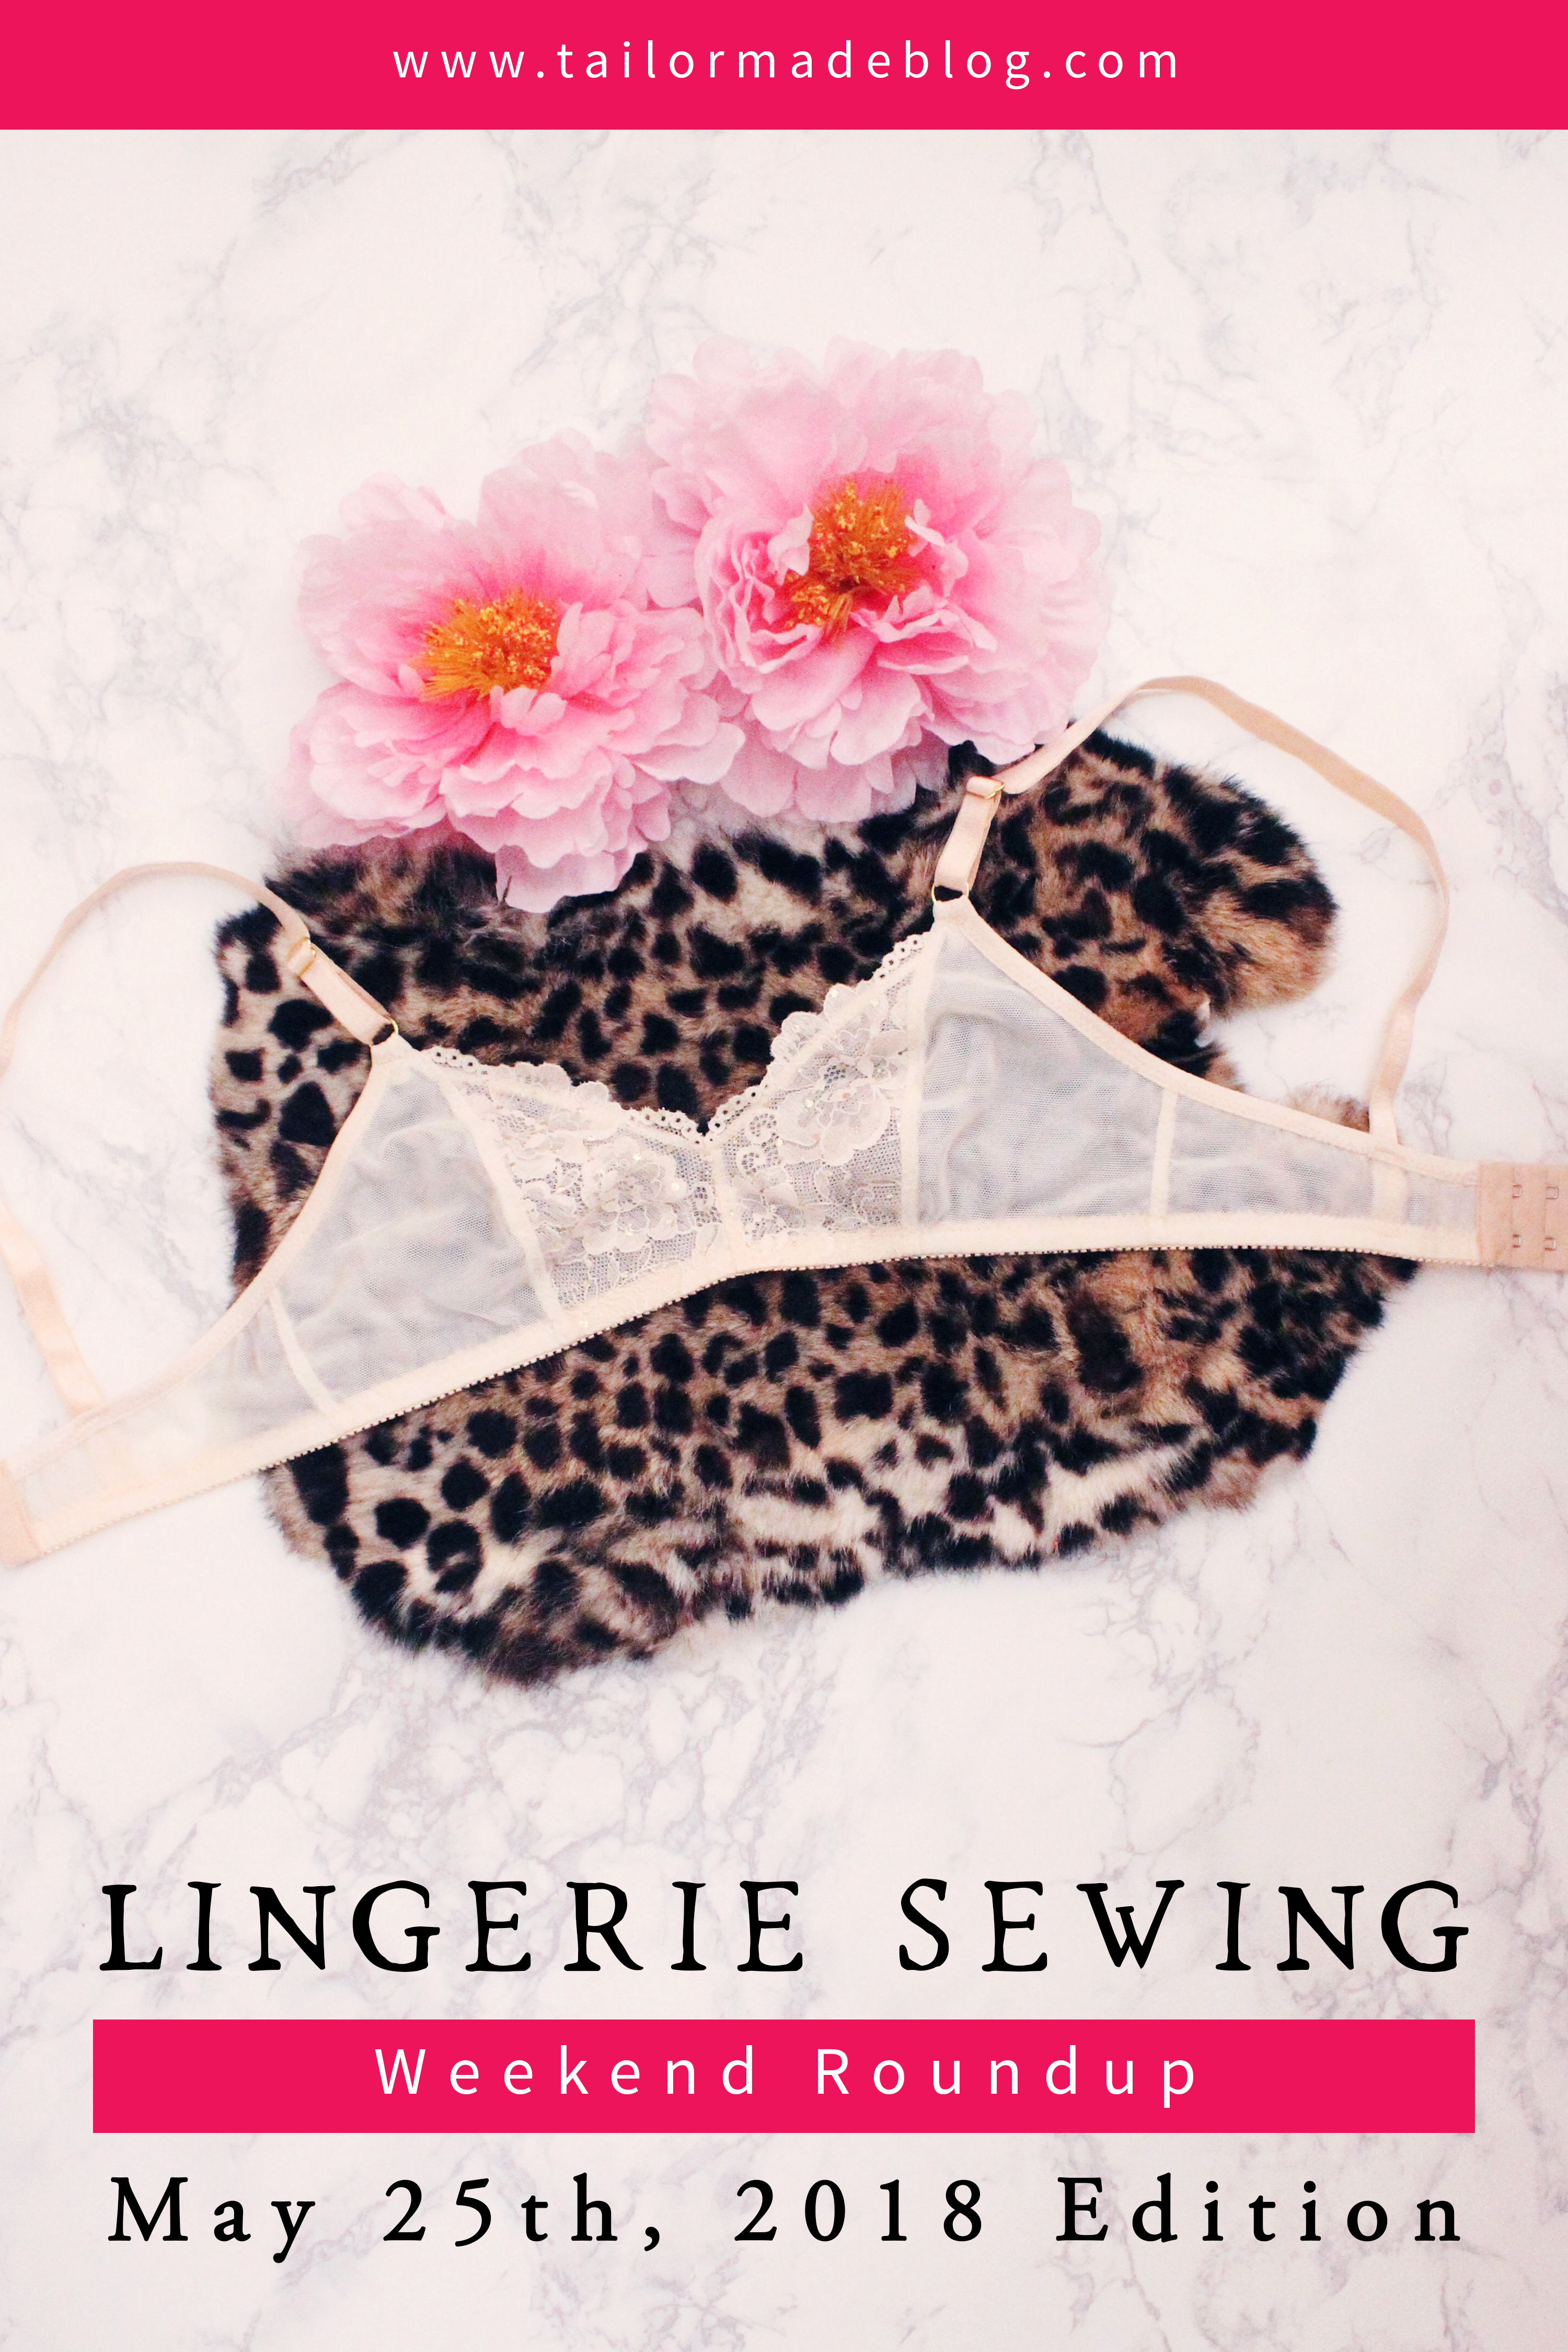 May 25th, 2018 Lingerie Sewing Weekend Roundup